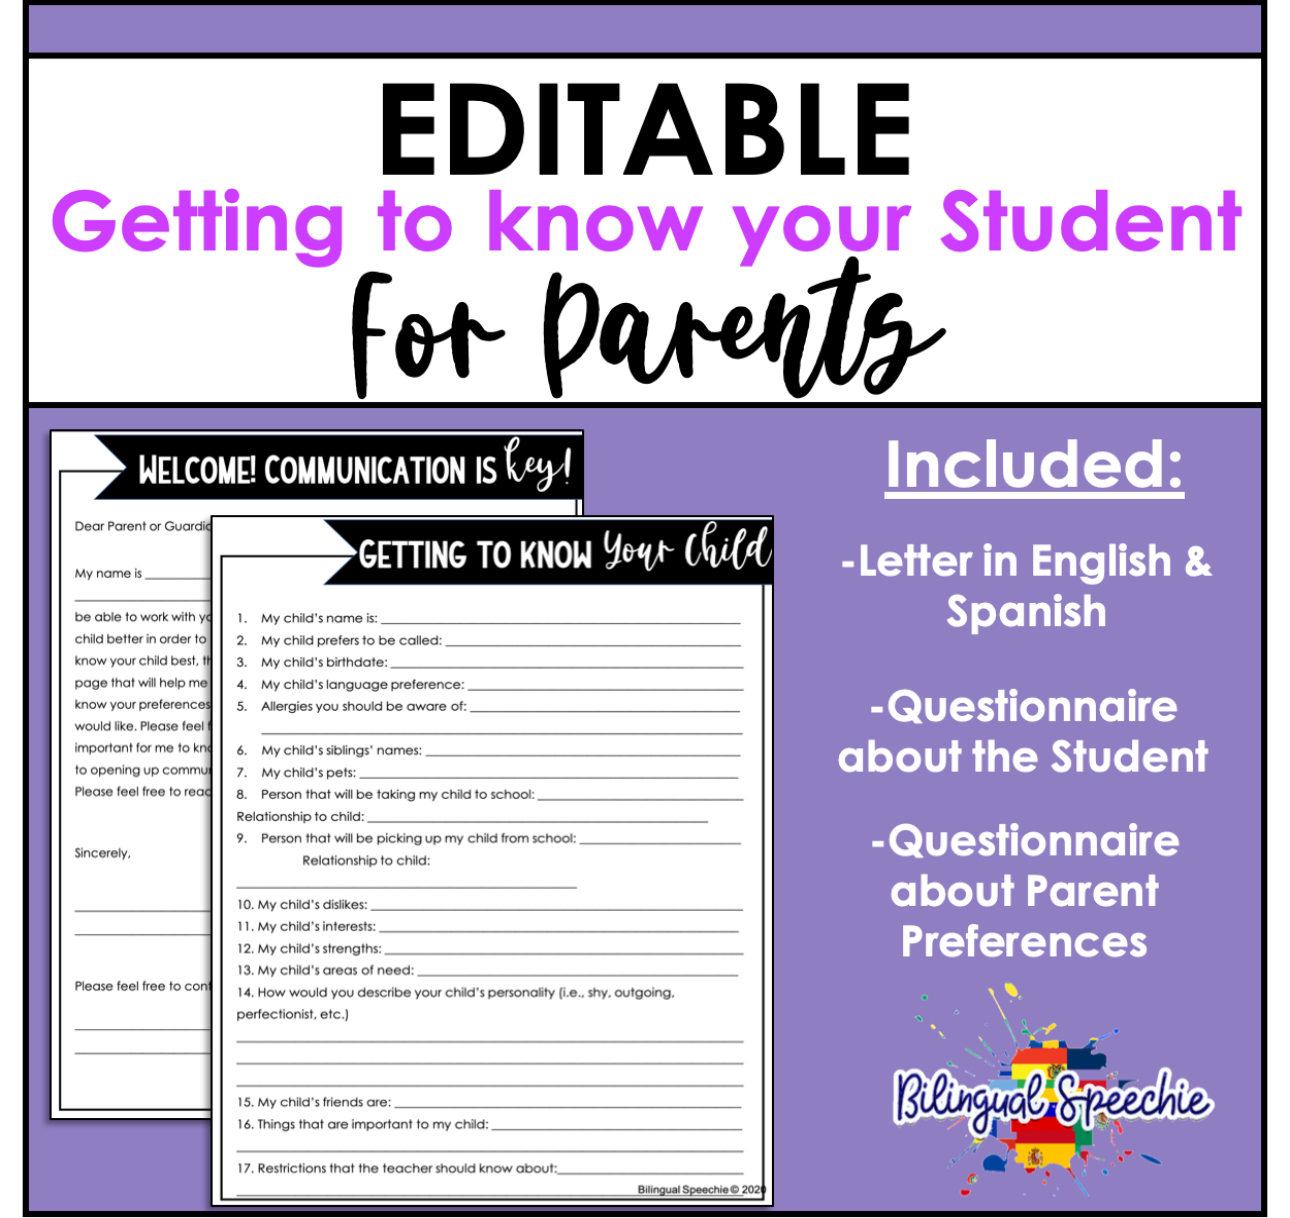 Editable Letter for Parents | Getting to Know Your Student